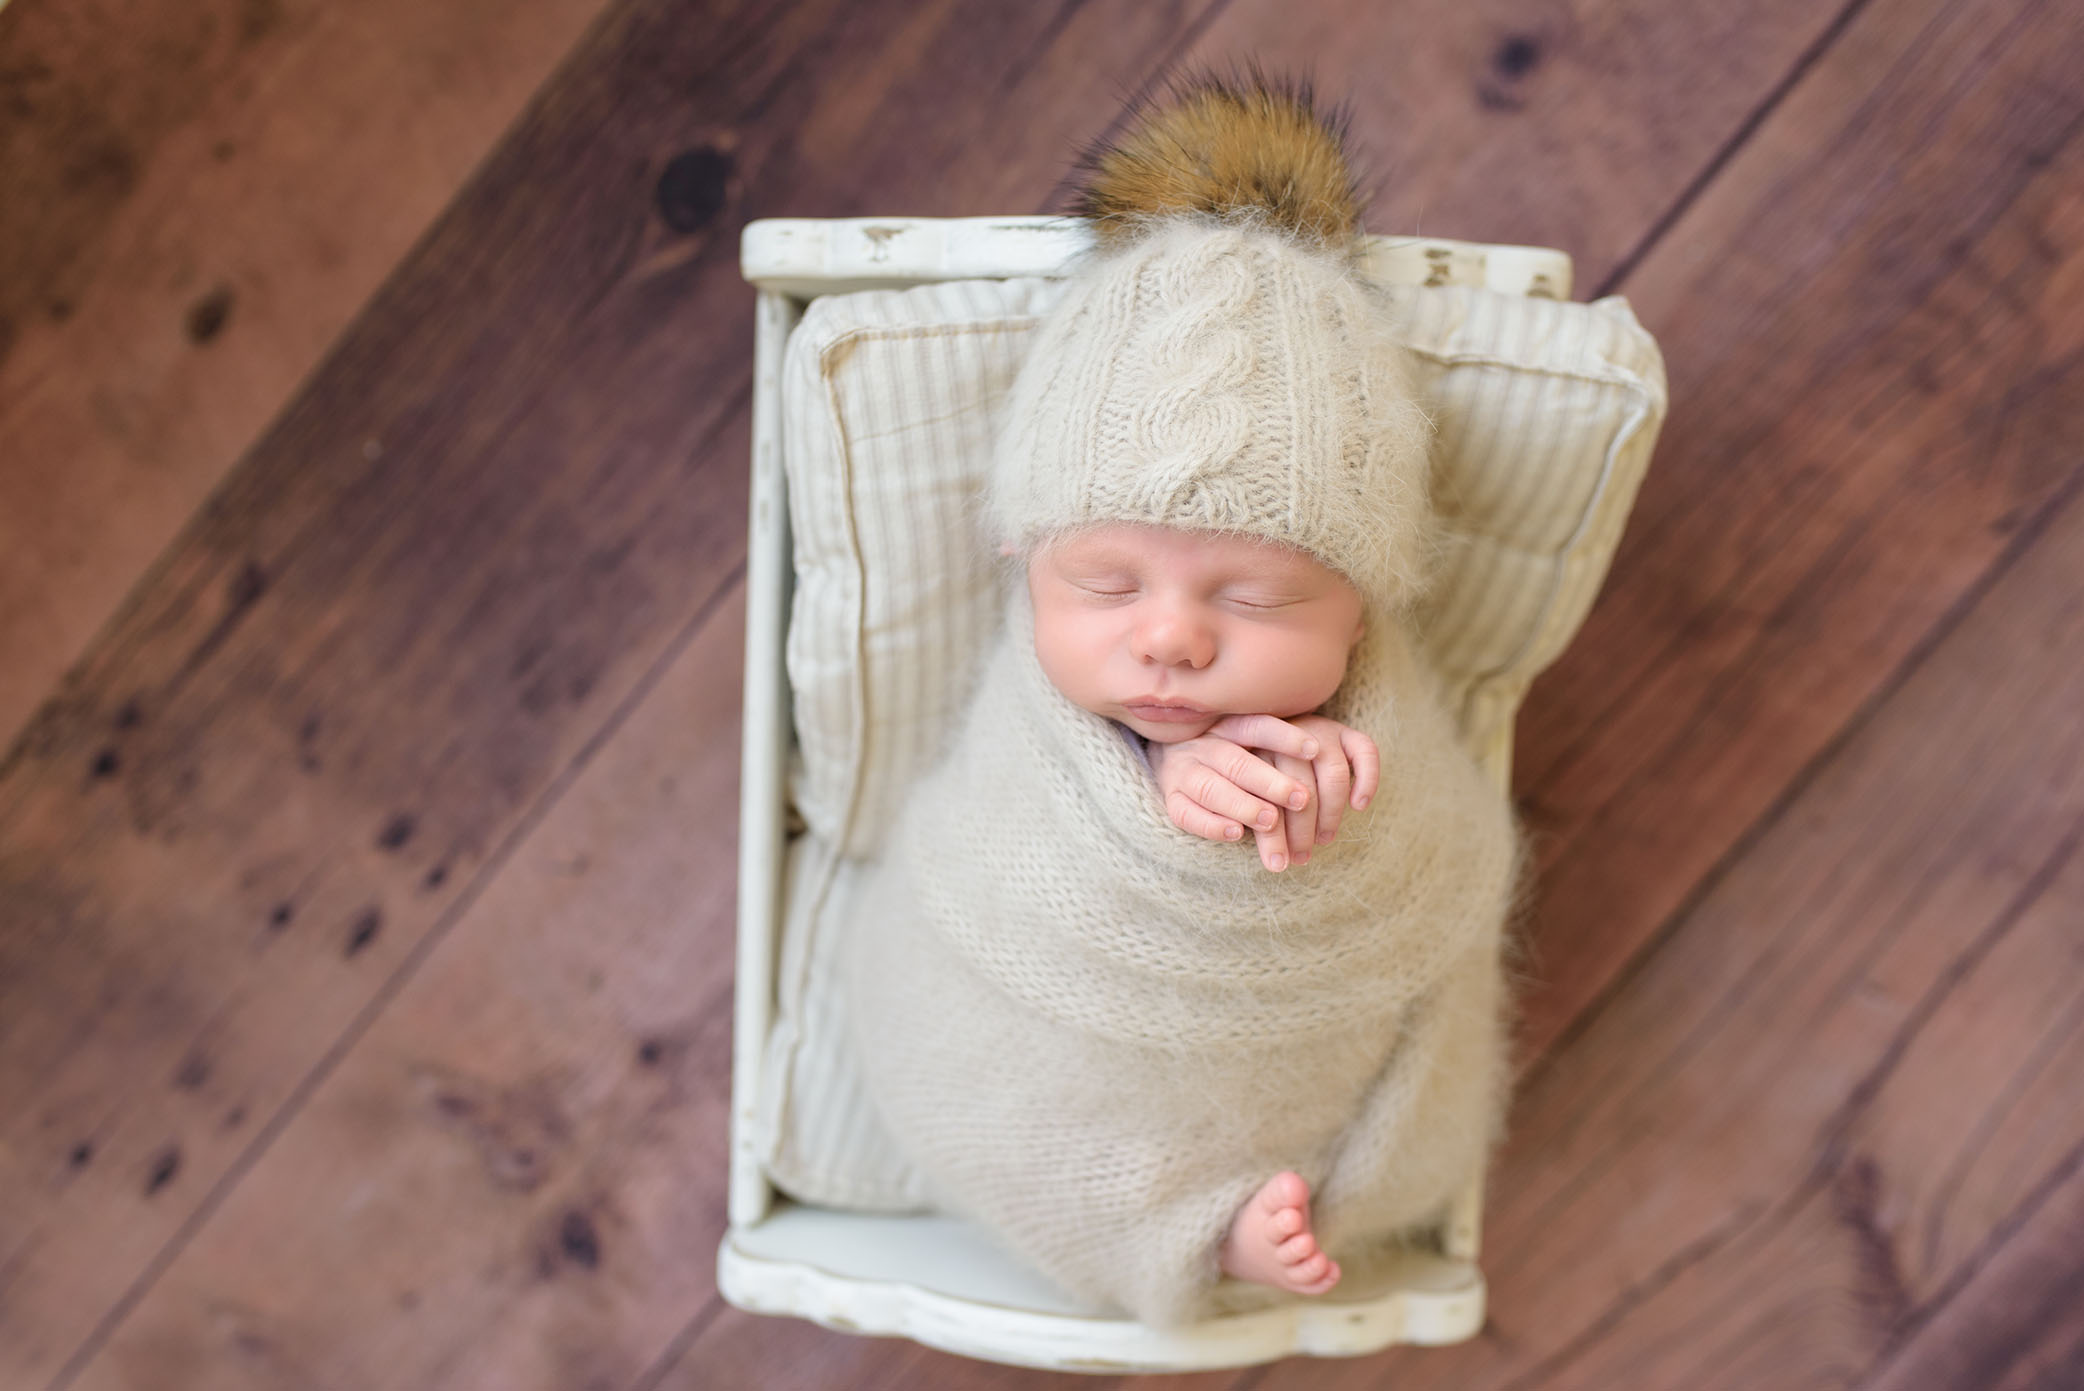 A Newborn Baby Posed On The Floor In Cradle